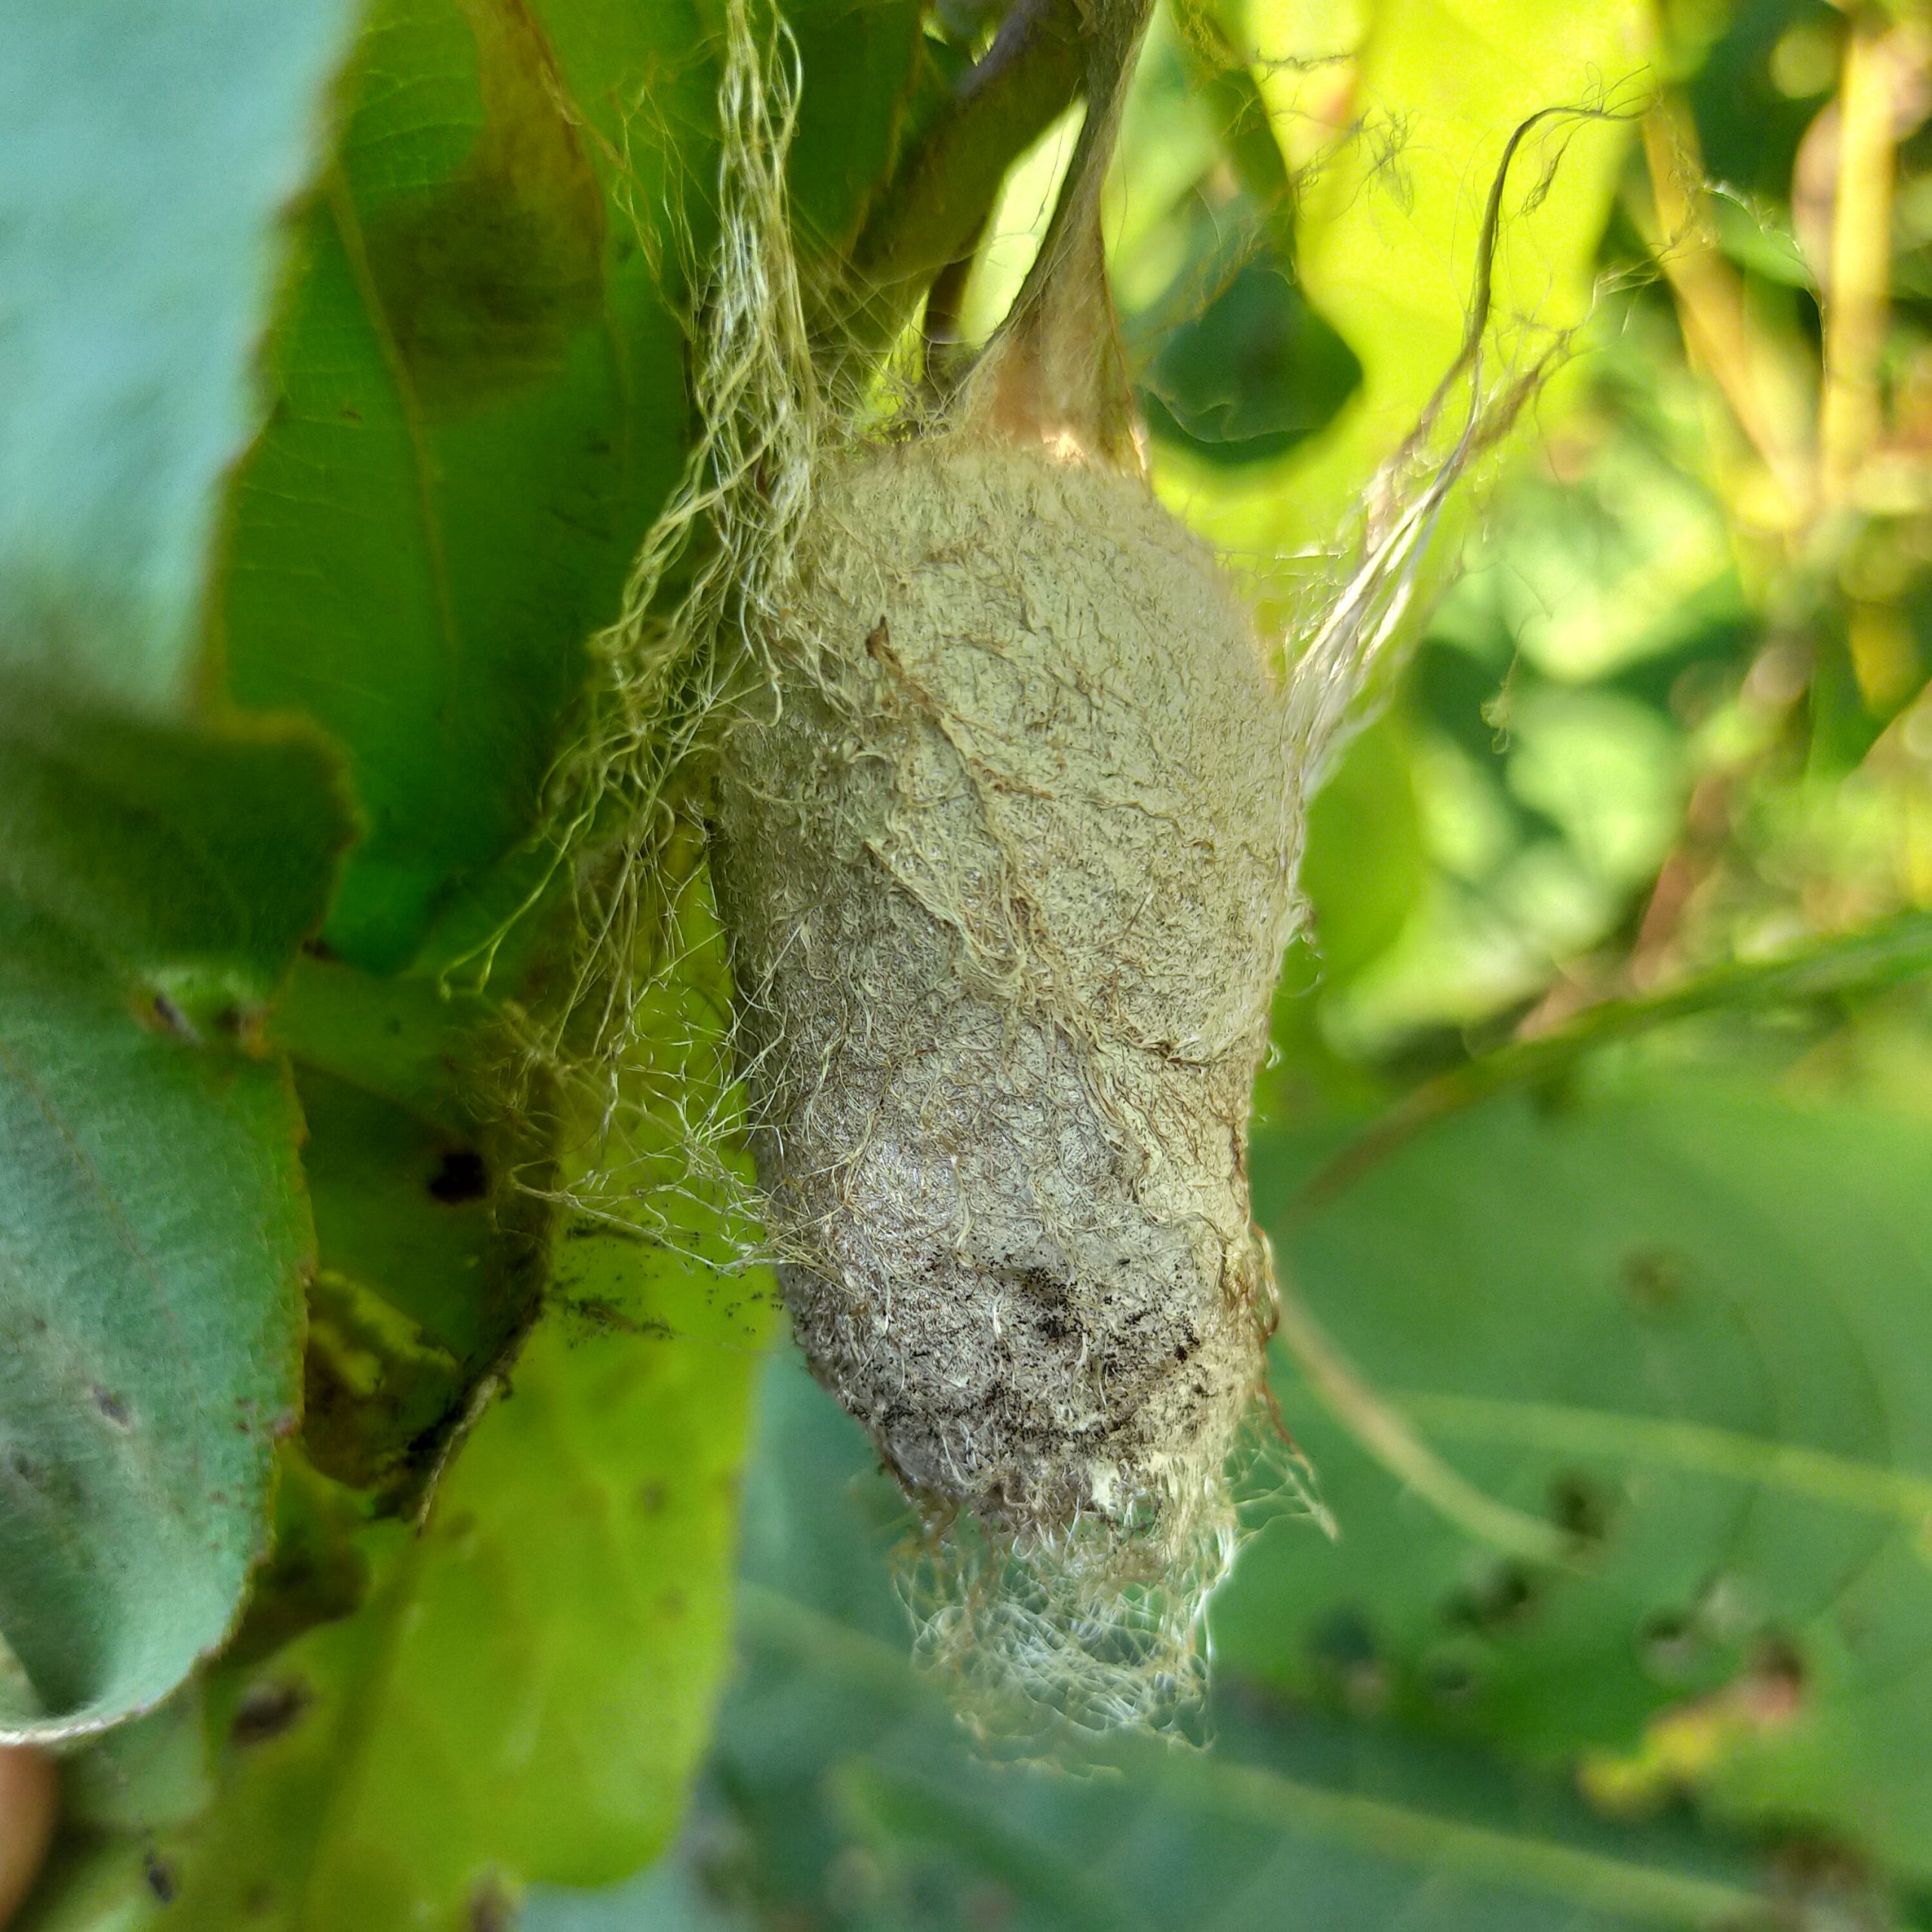 Cocoon formation of silk worm